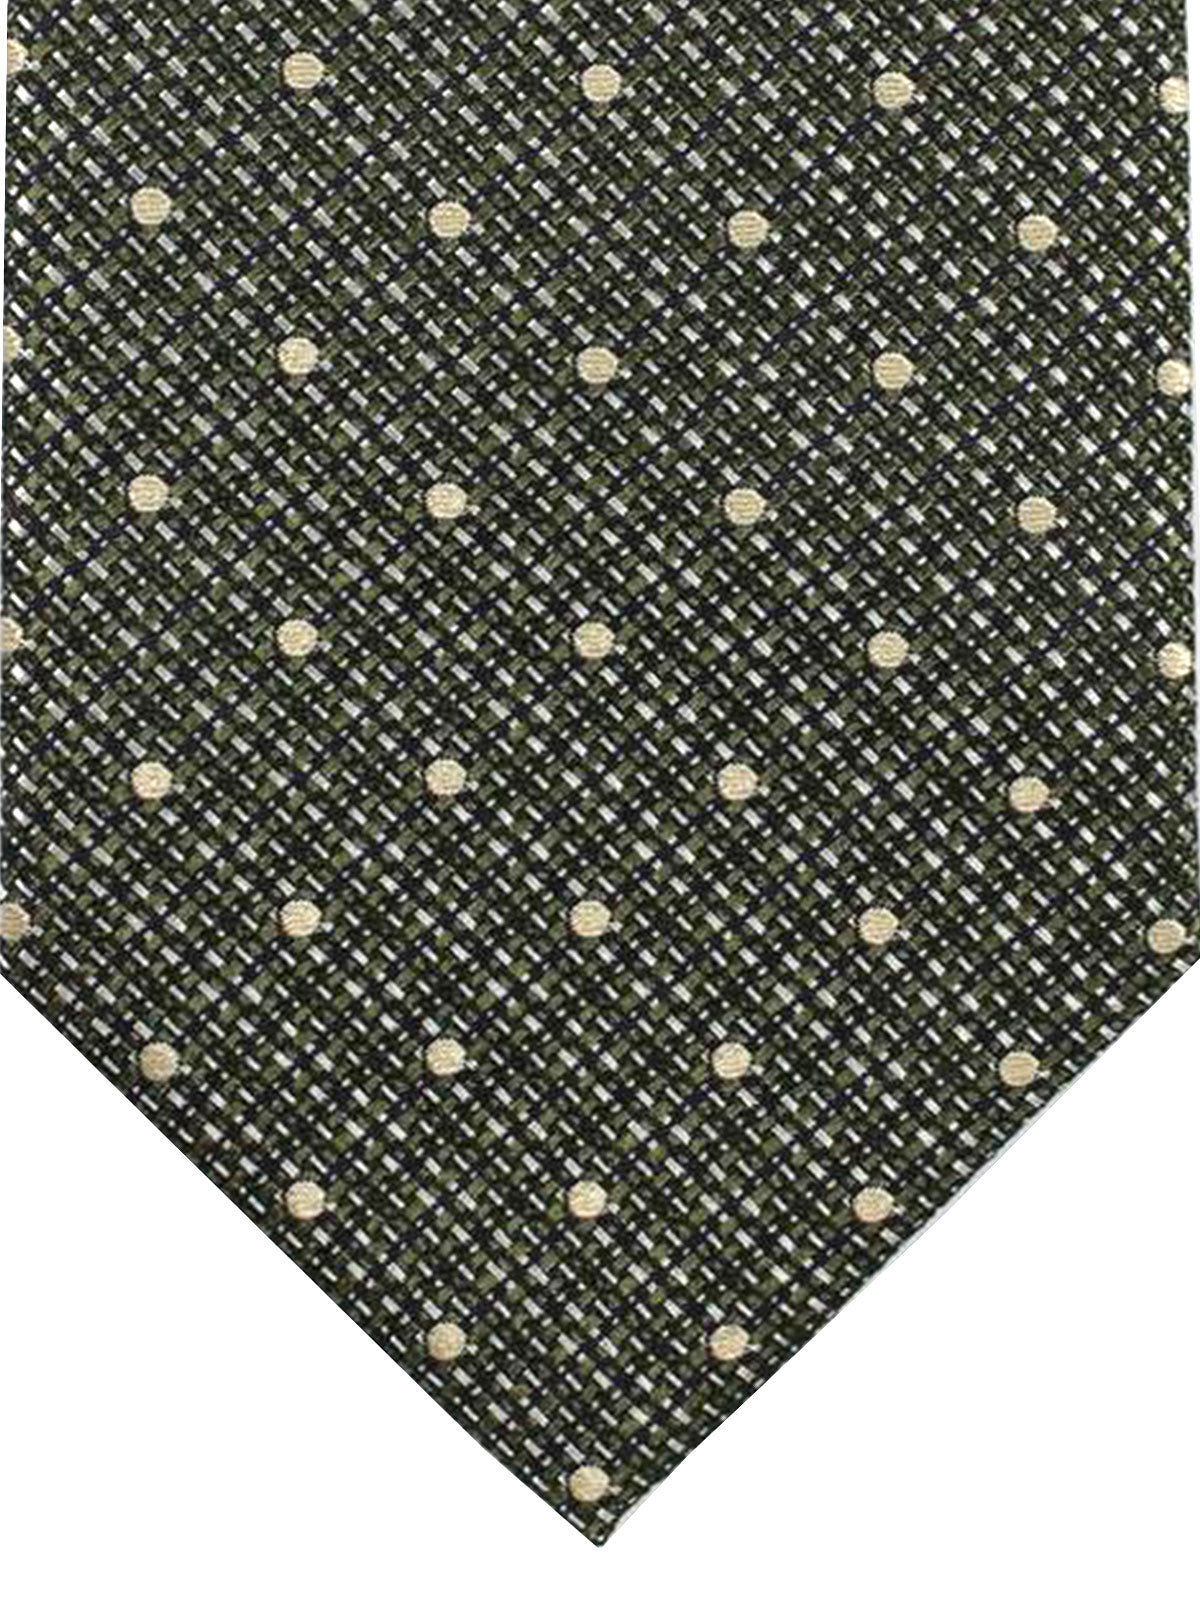 Tom Ford Ties Sale | Bow Ties | Dress Shirts SALE Page 13 - Tie Deals